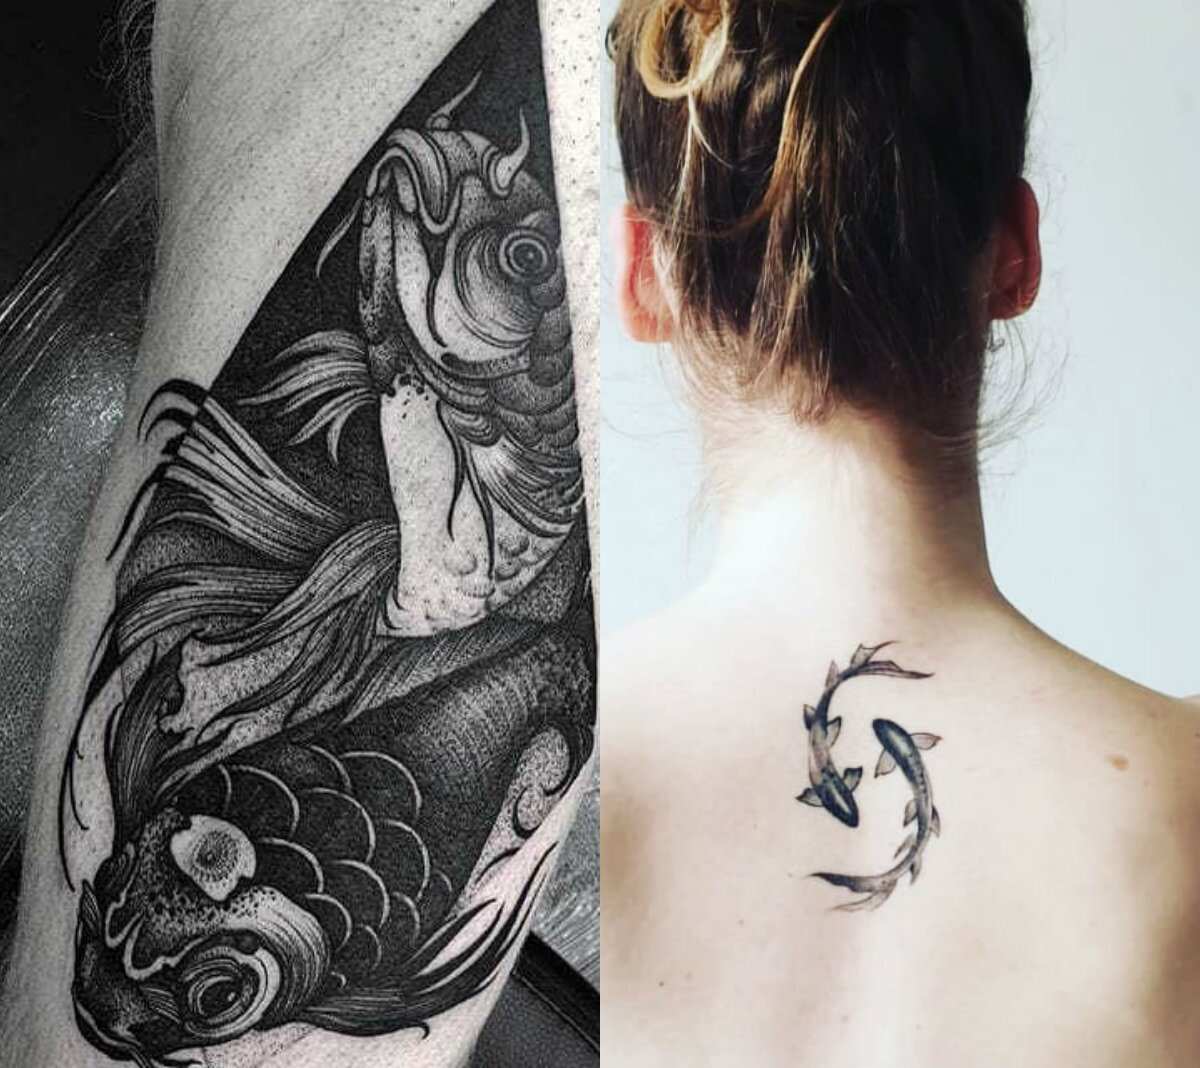 50 Pisces tattoo designs and ideas - Legit.ng